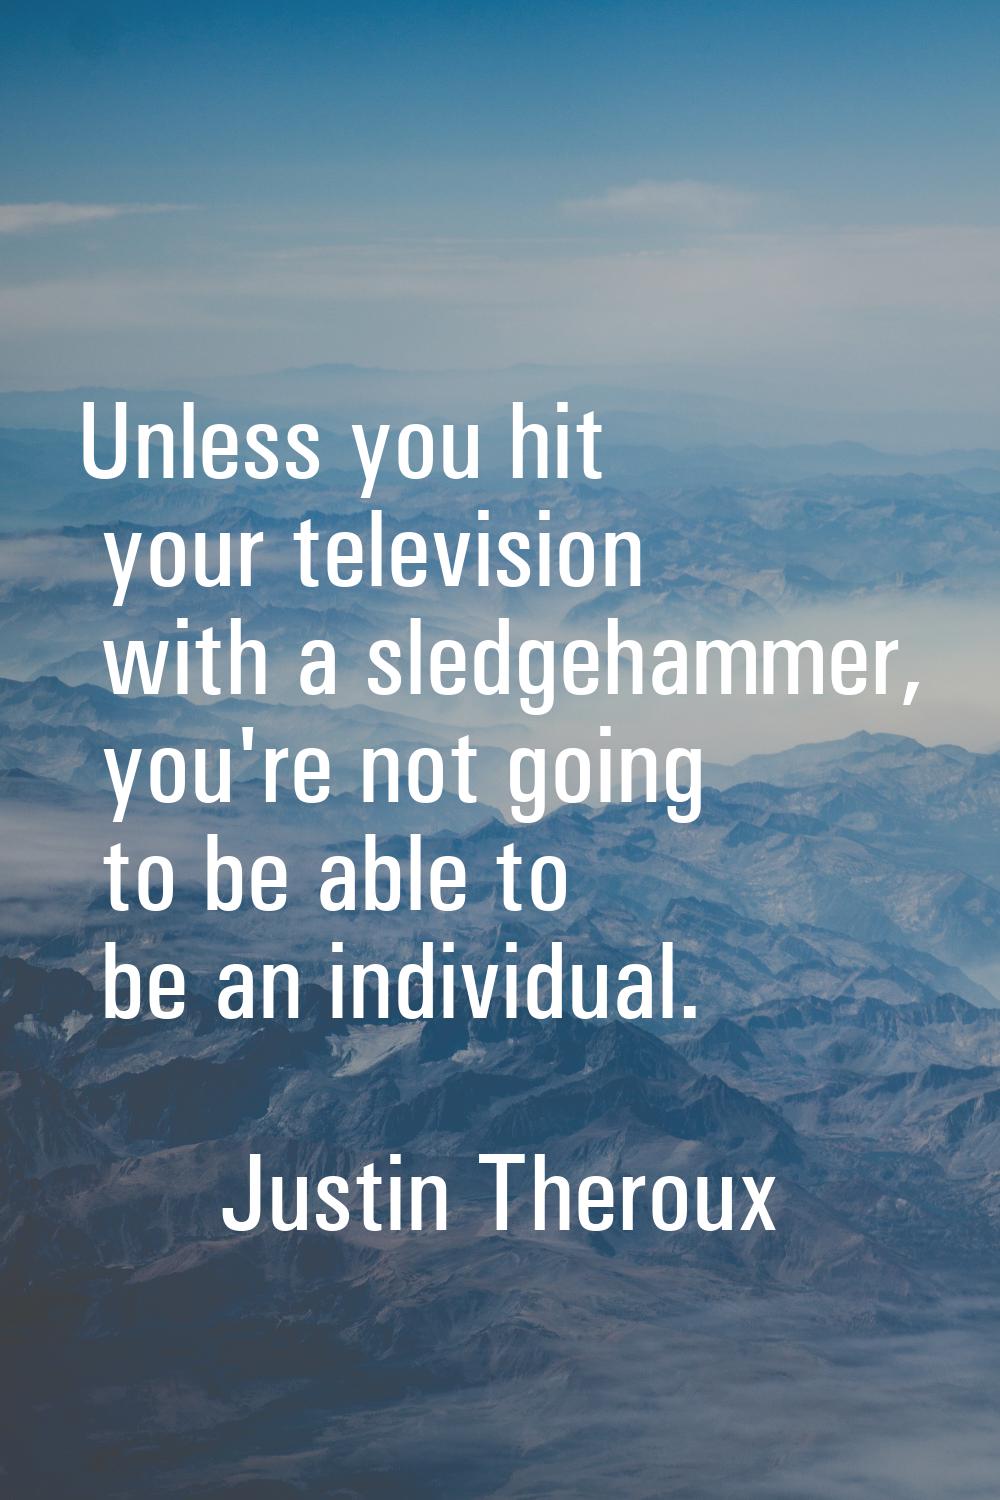 Unless you hit your television with a sledgehammer, you're not going to be able to be an individual